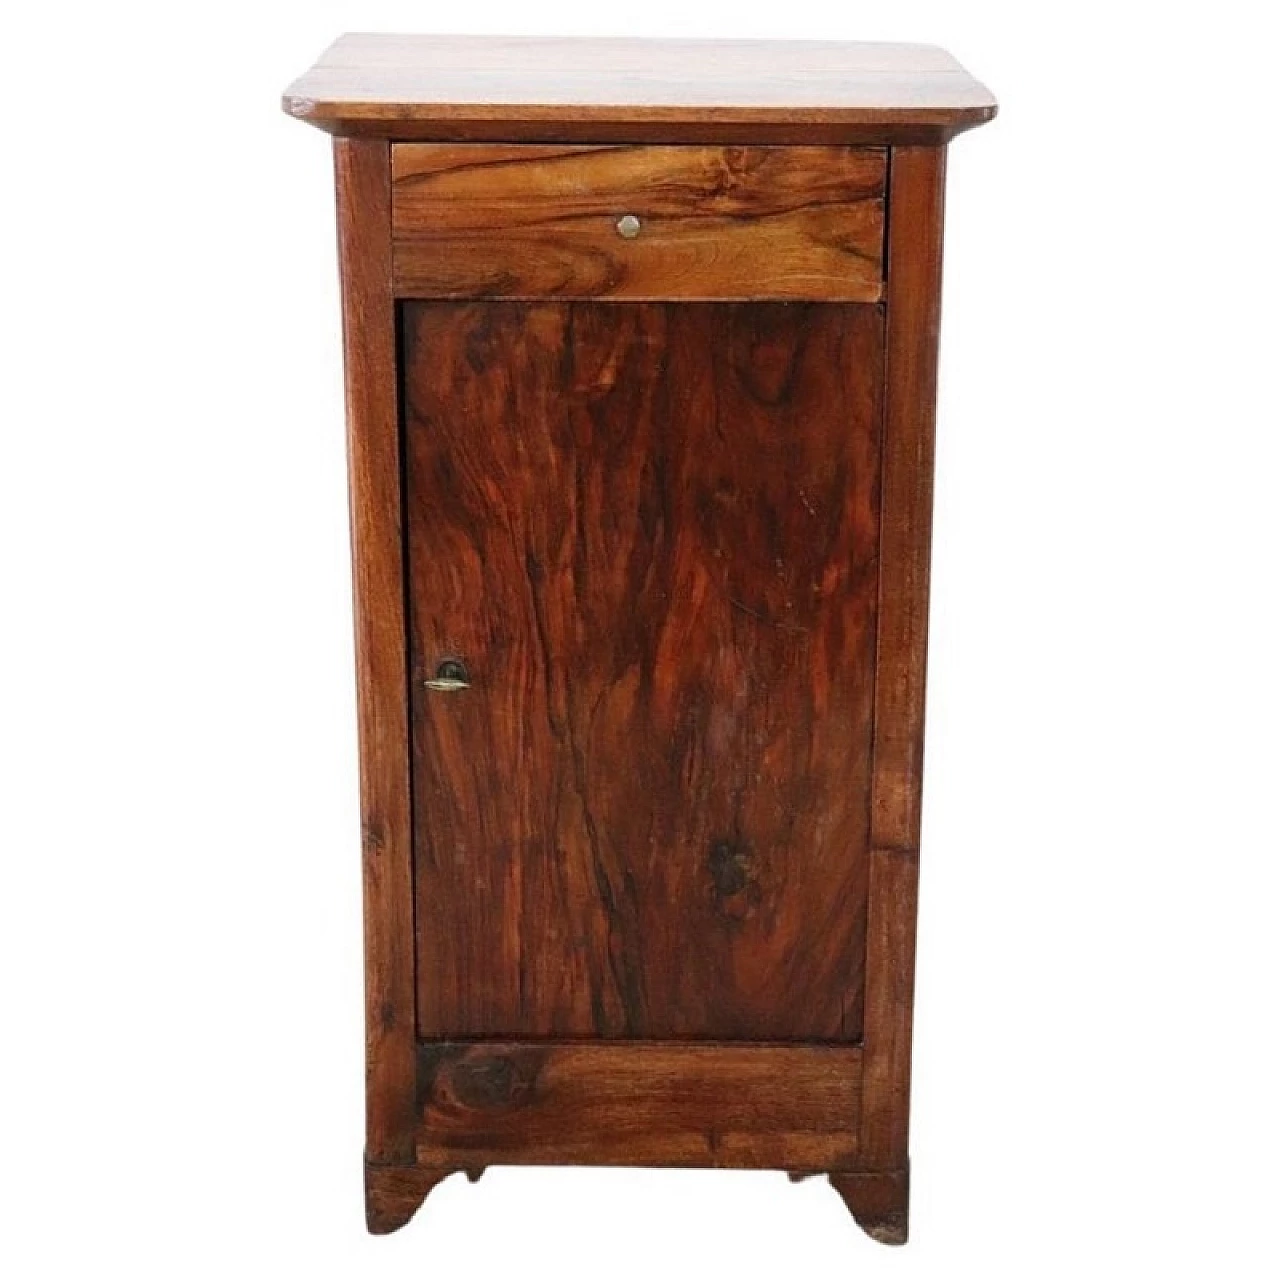 Polished and finished walnut bedside table, 19th century 1